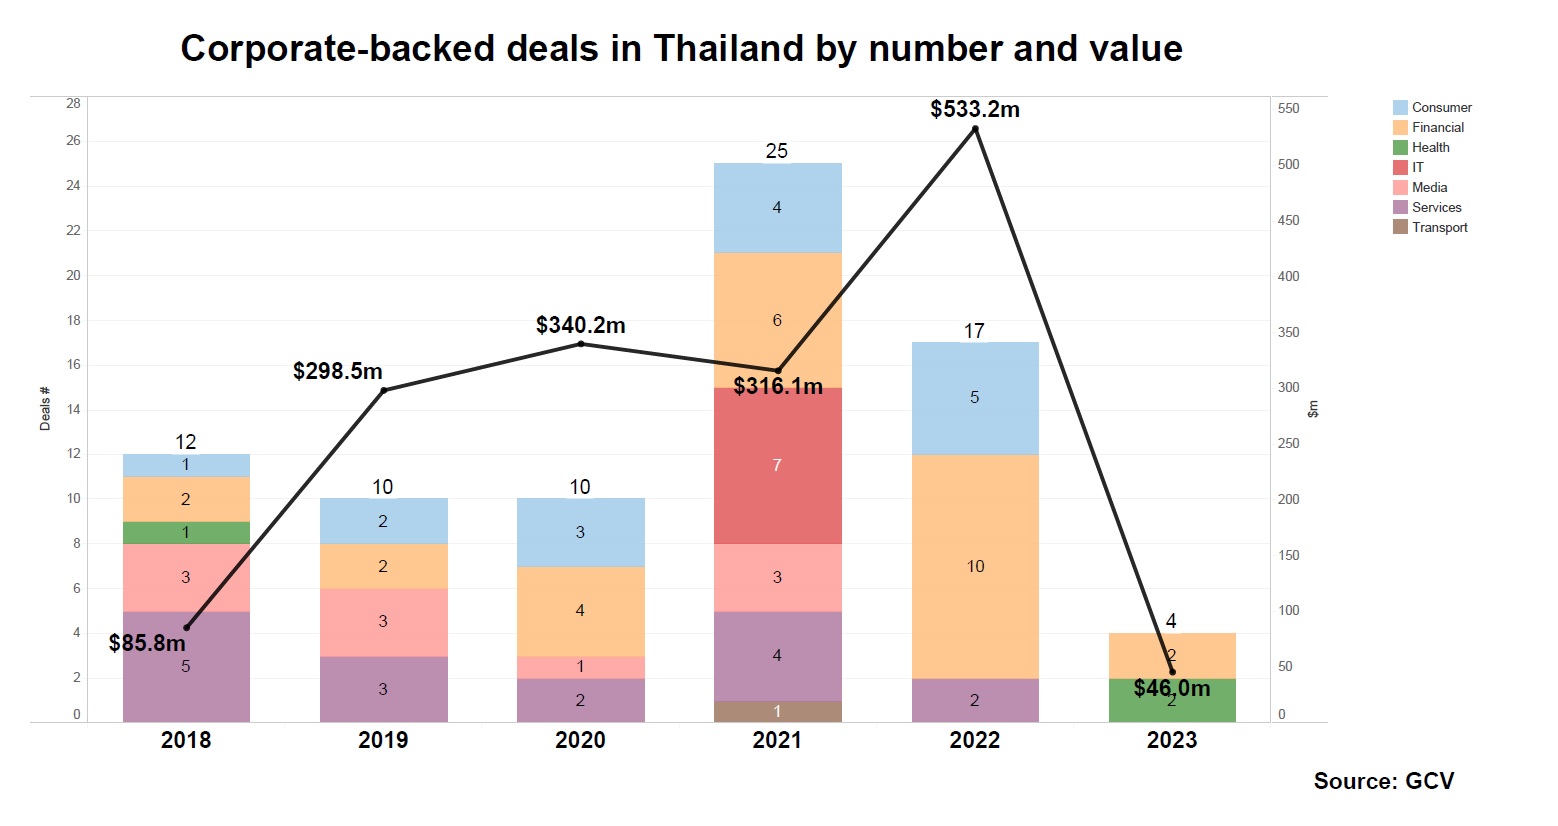 Corporate-backed deals in Thailand by number and value